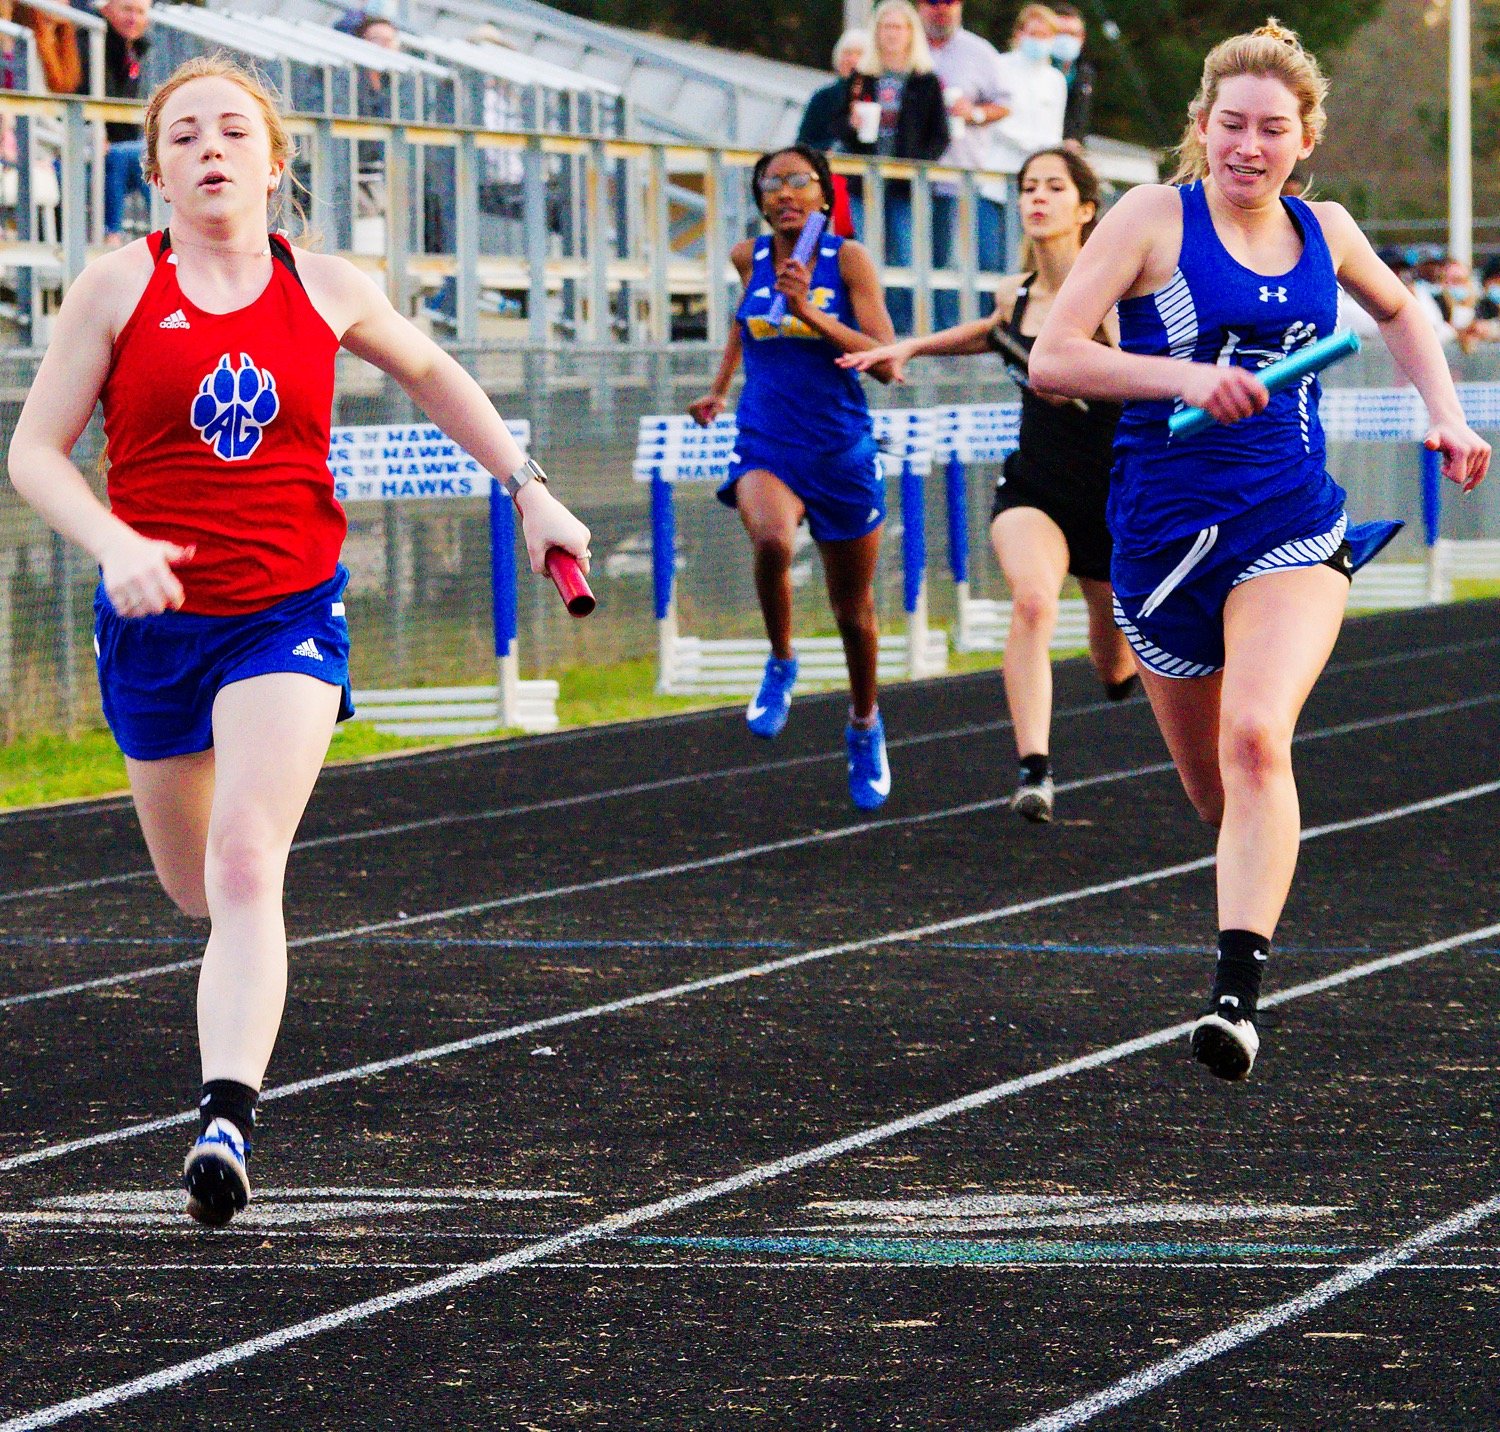 Gracie Teel (left) successfully anchors the Lady Panthers 4x100m relay team. [just a start - finish the album here]